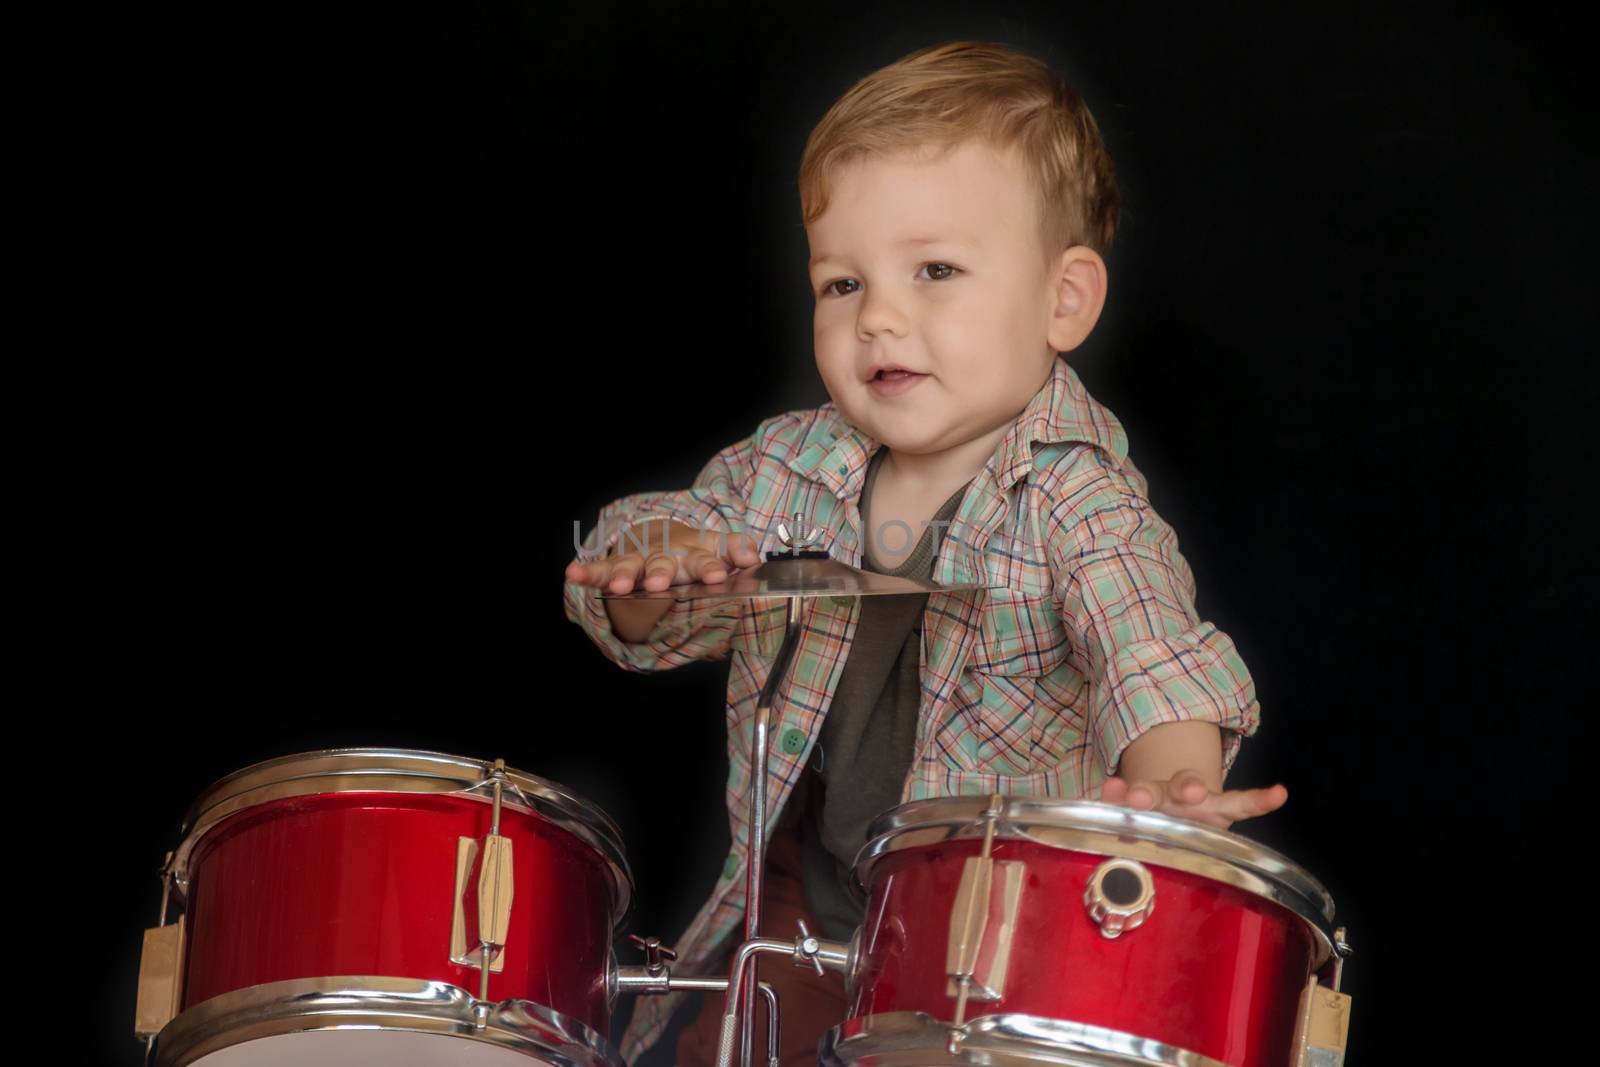 Two year caucasian boy is Playing Drum Set Isolated on Black Background by galinasharapova